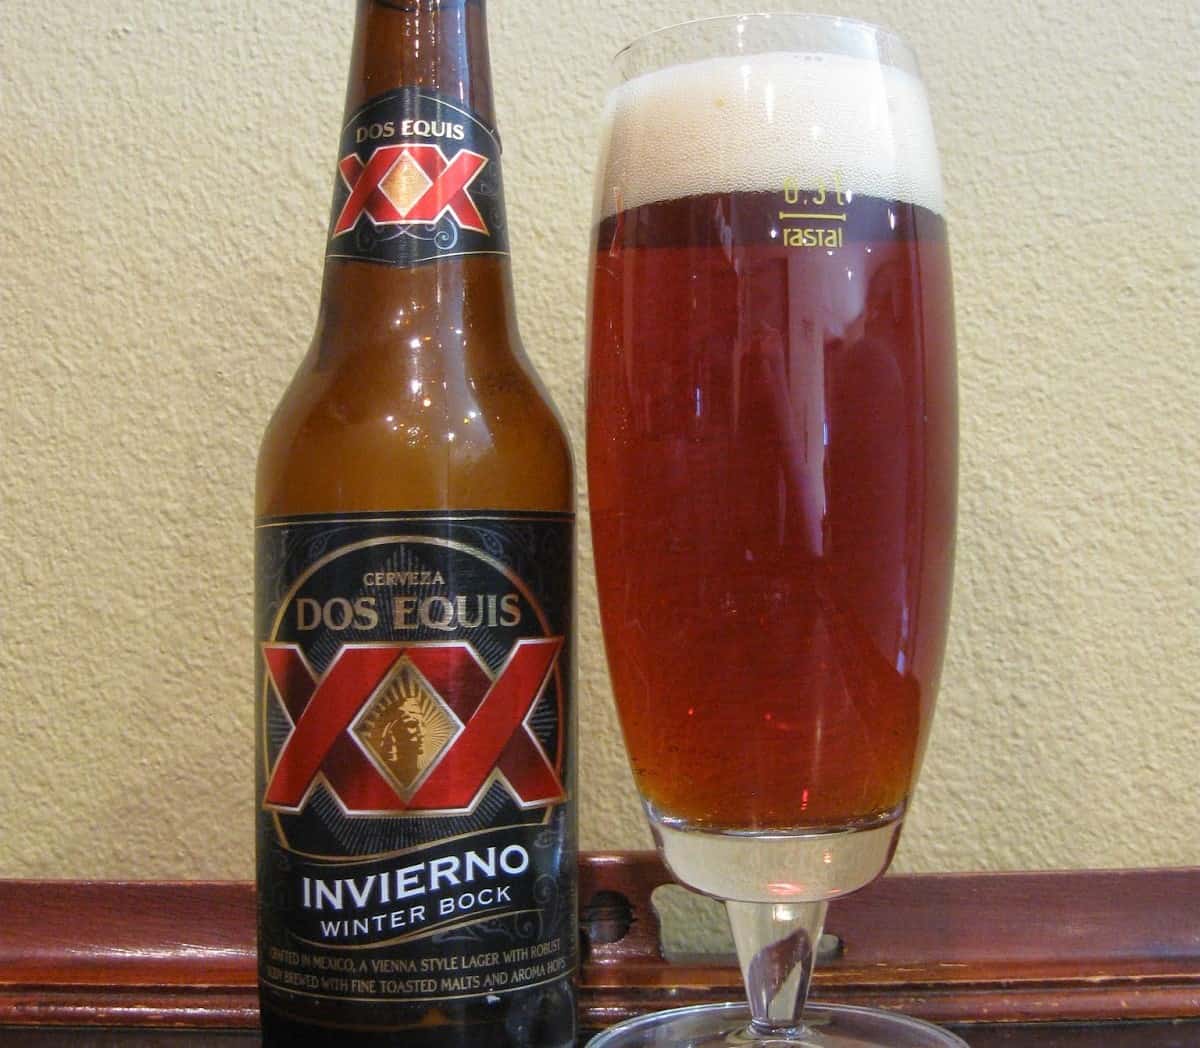 Dos Equis Alcohol Percentage: Understanding the Alcohol Content in Dos Equis Beer